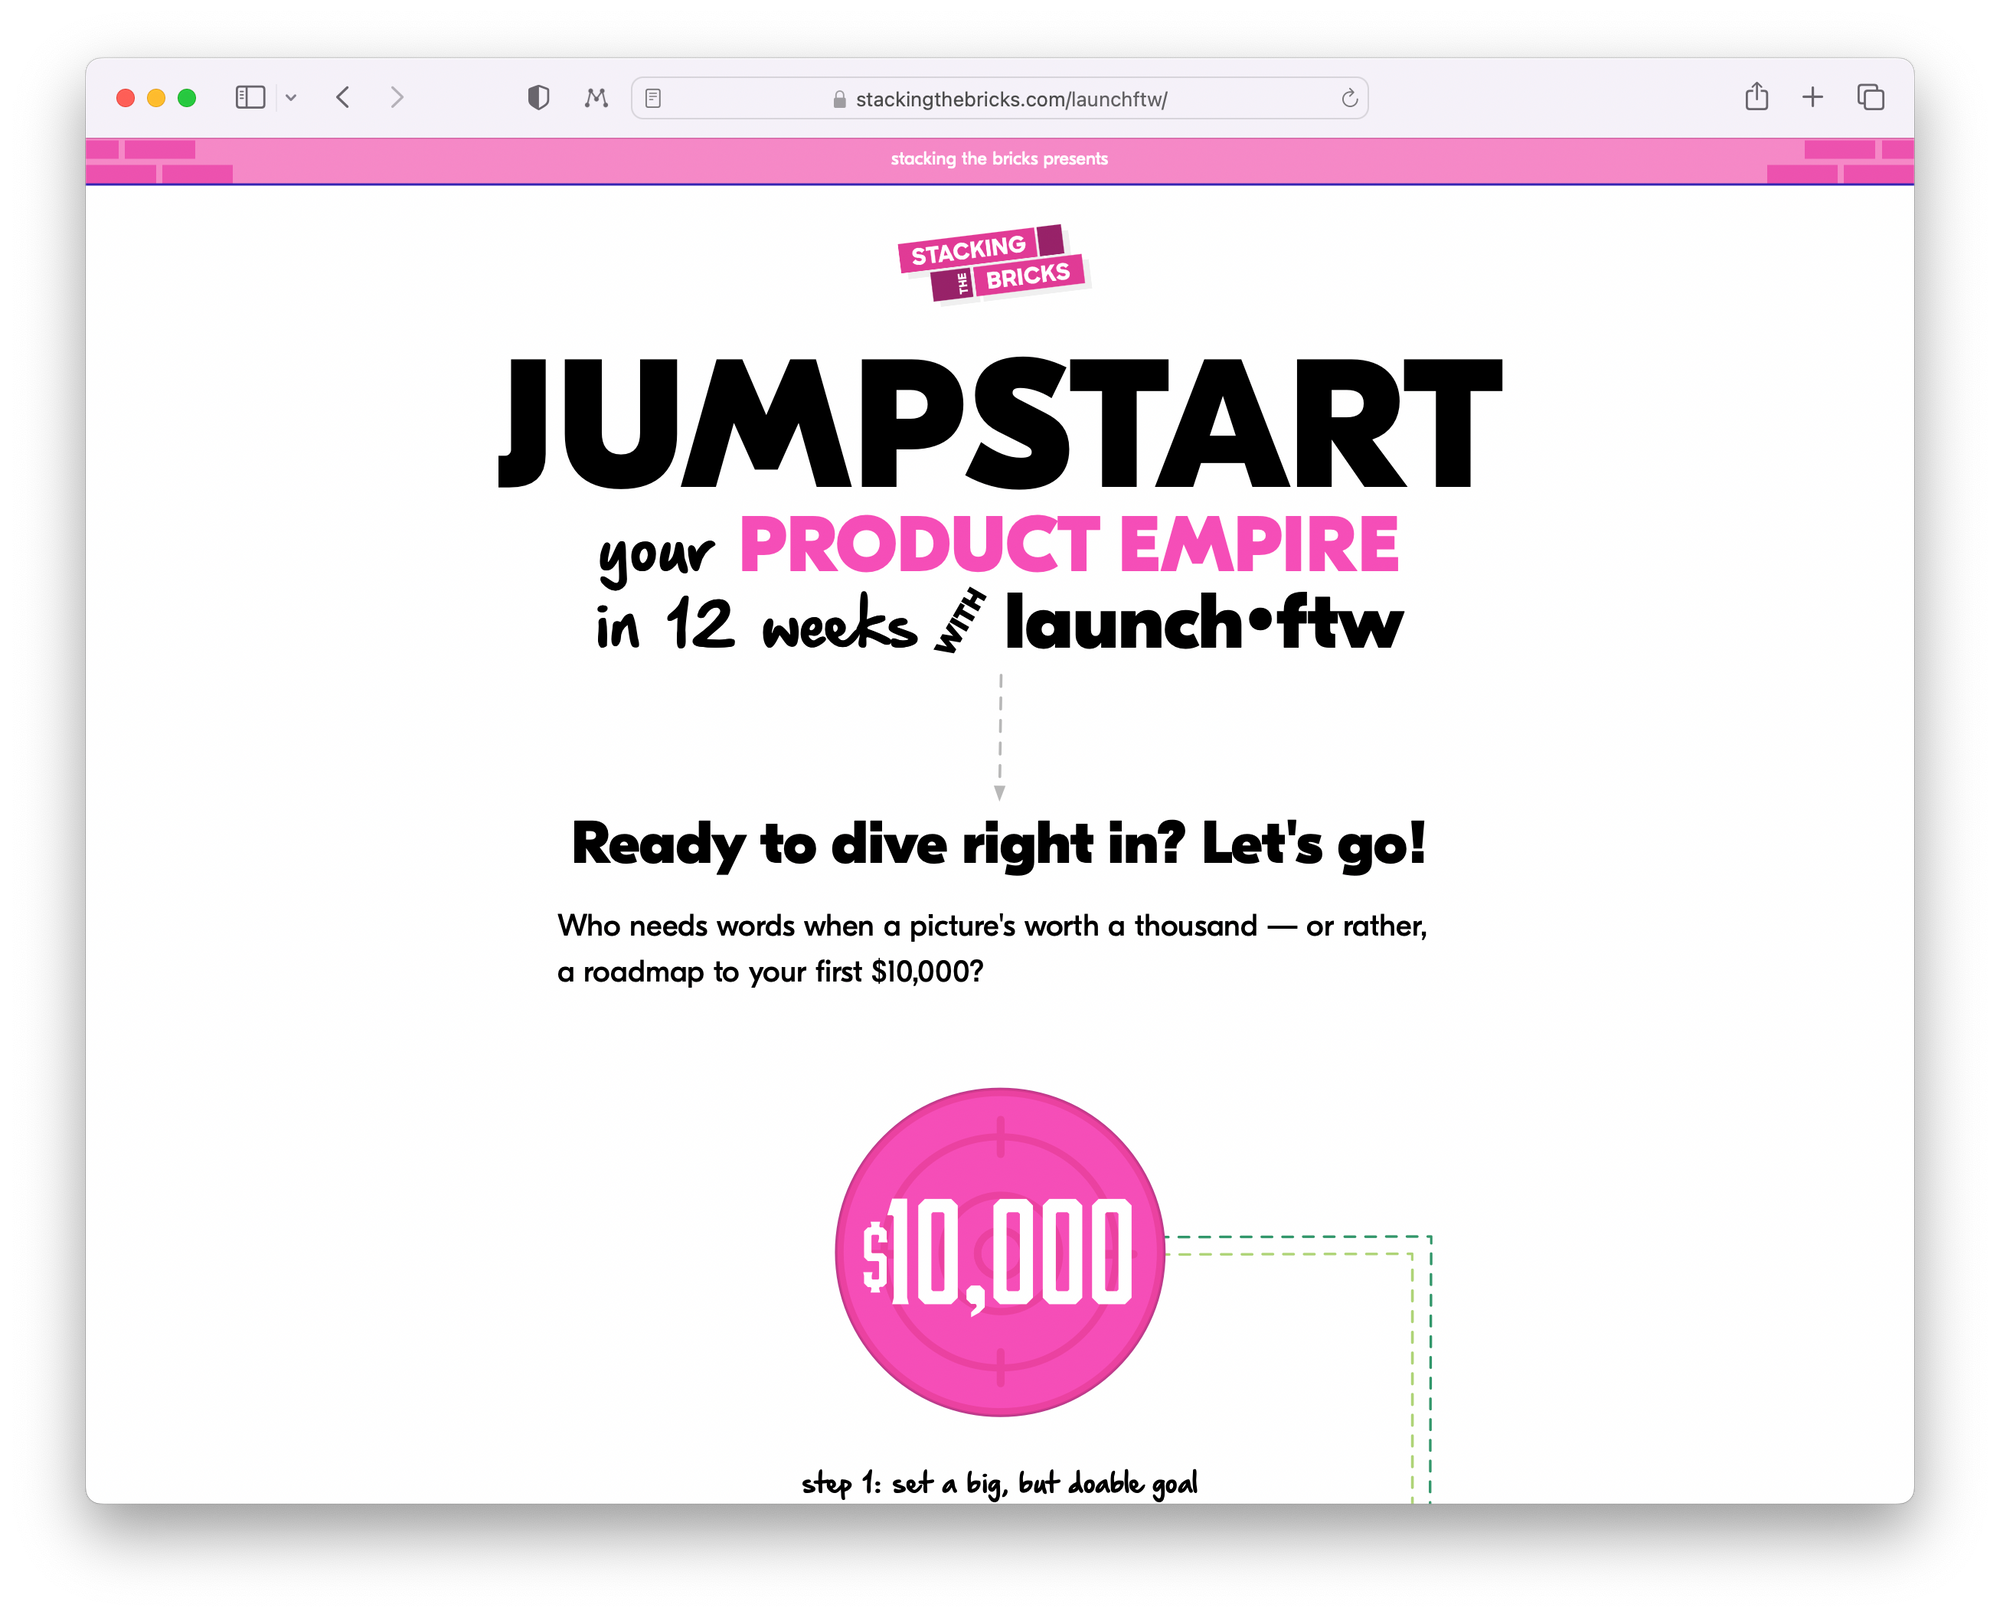 Well-designed new landing page with headline, nice typography, and a $10,000 bullseye graphic.